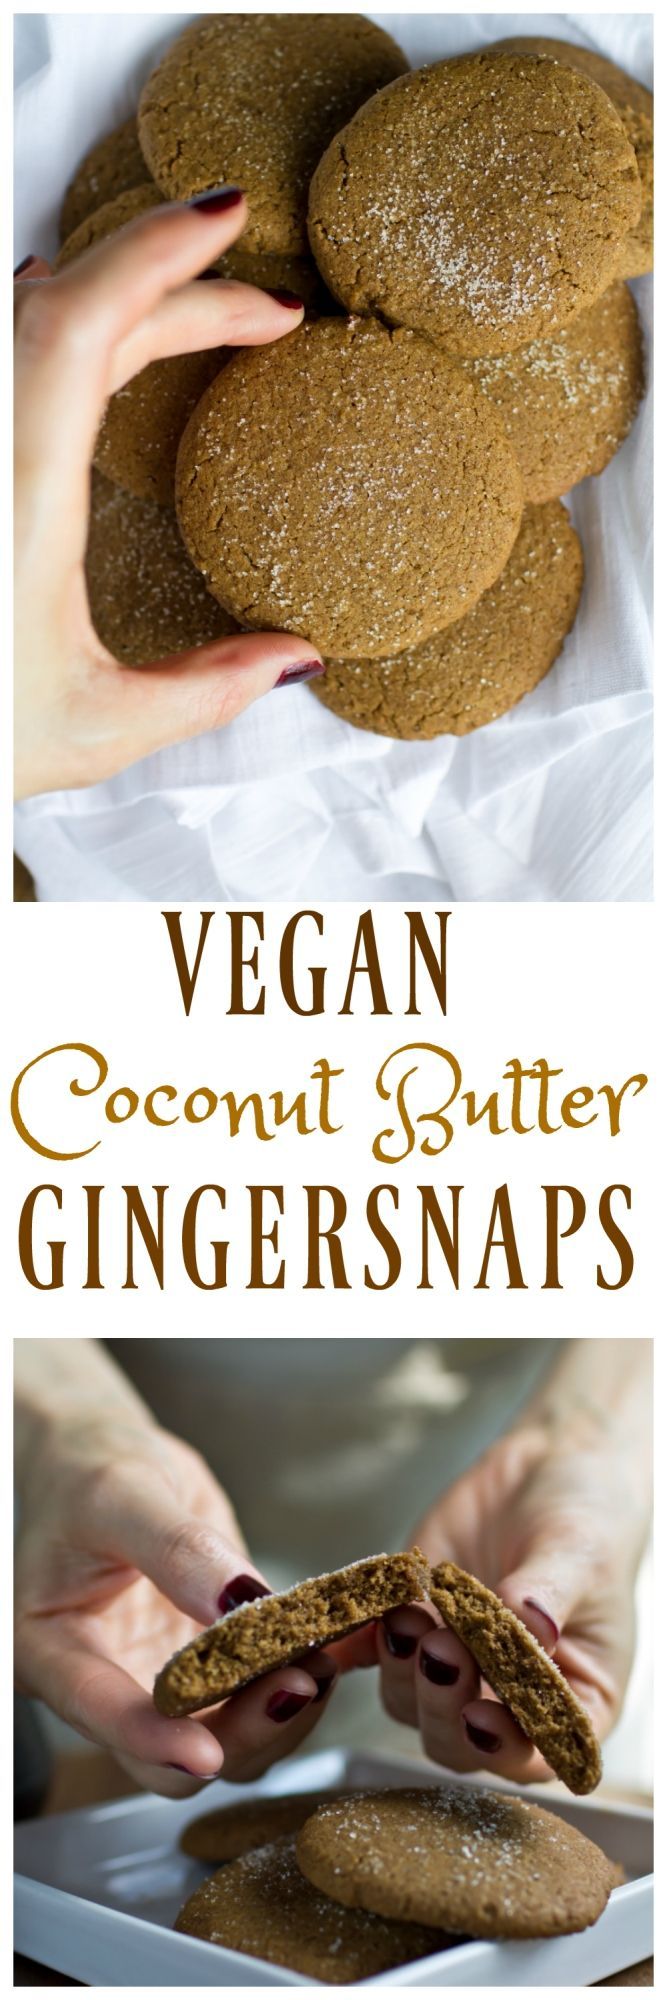 A delicious take on classic gingersnaps. These Vegan Gingersnaps have coconut butt